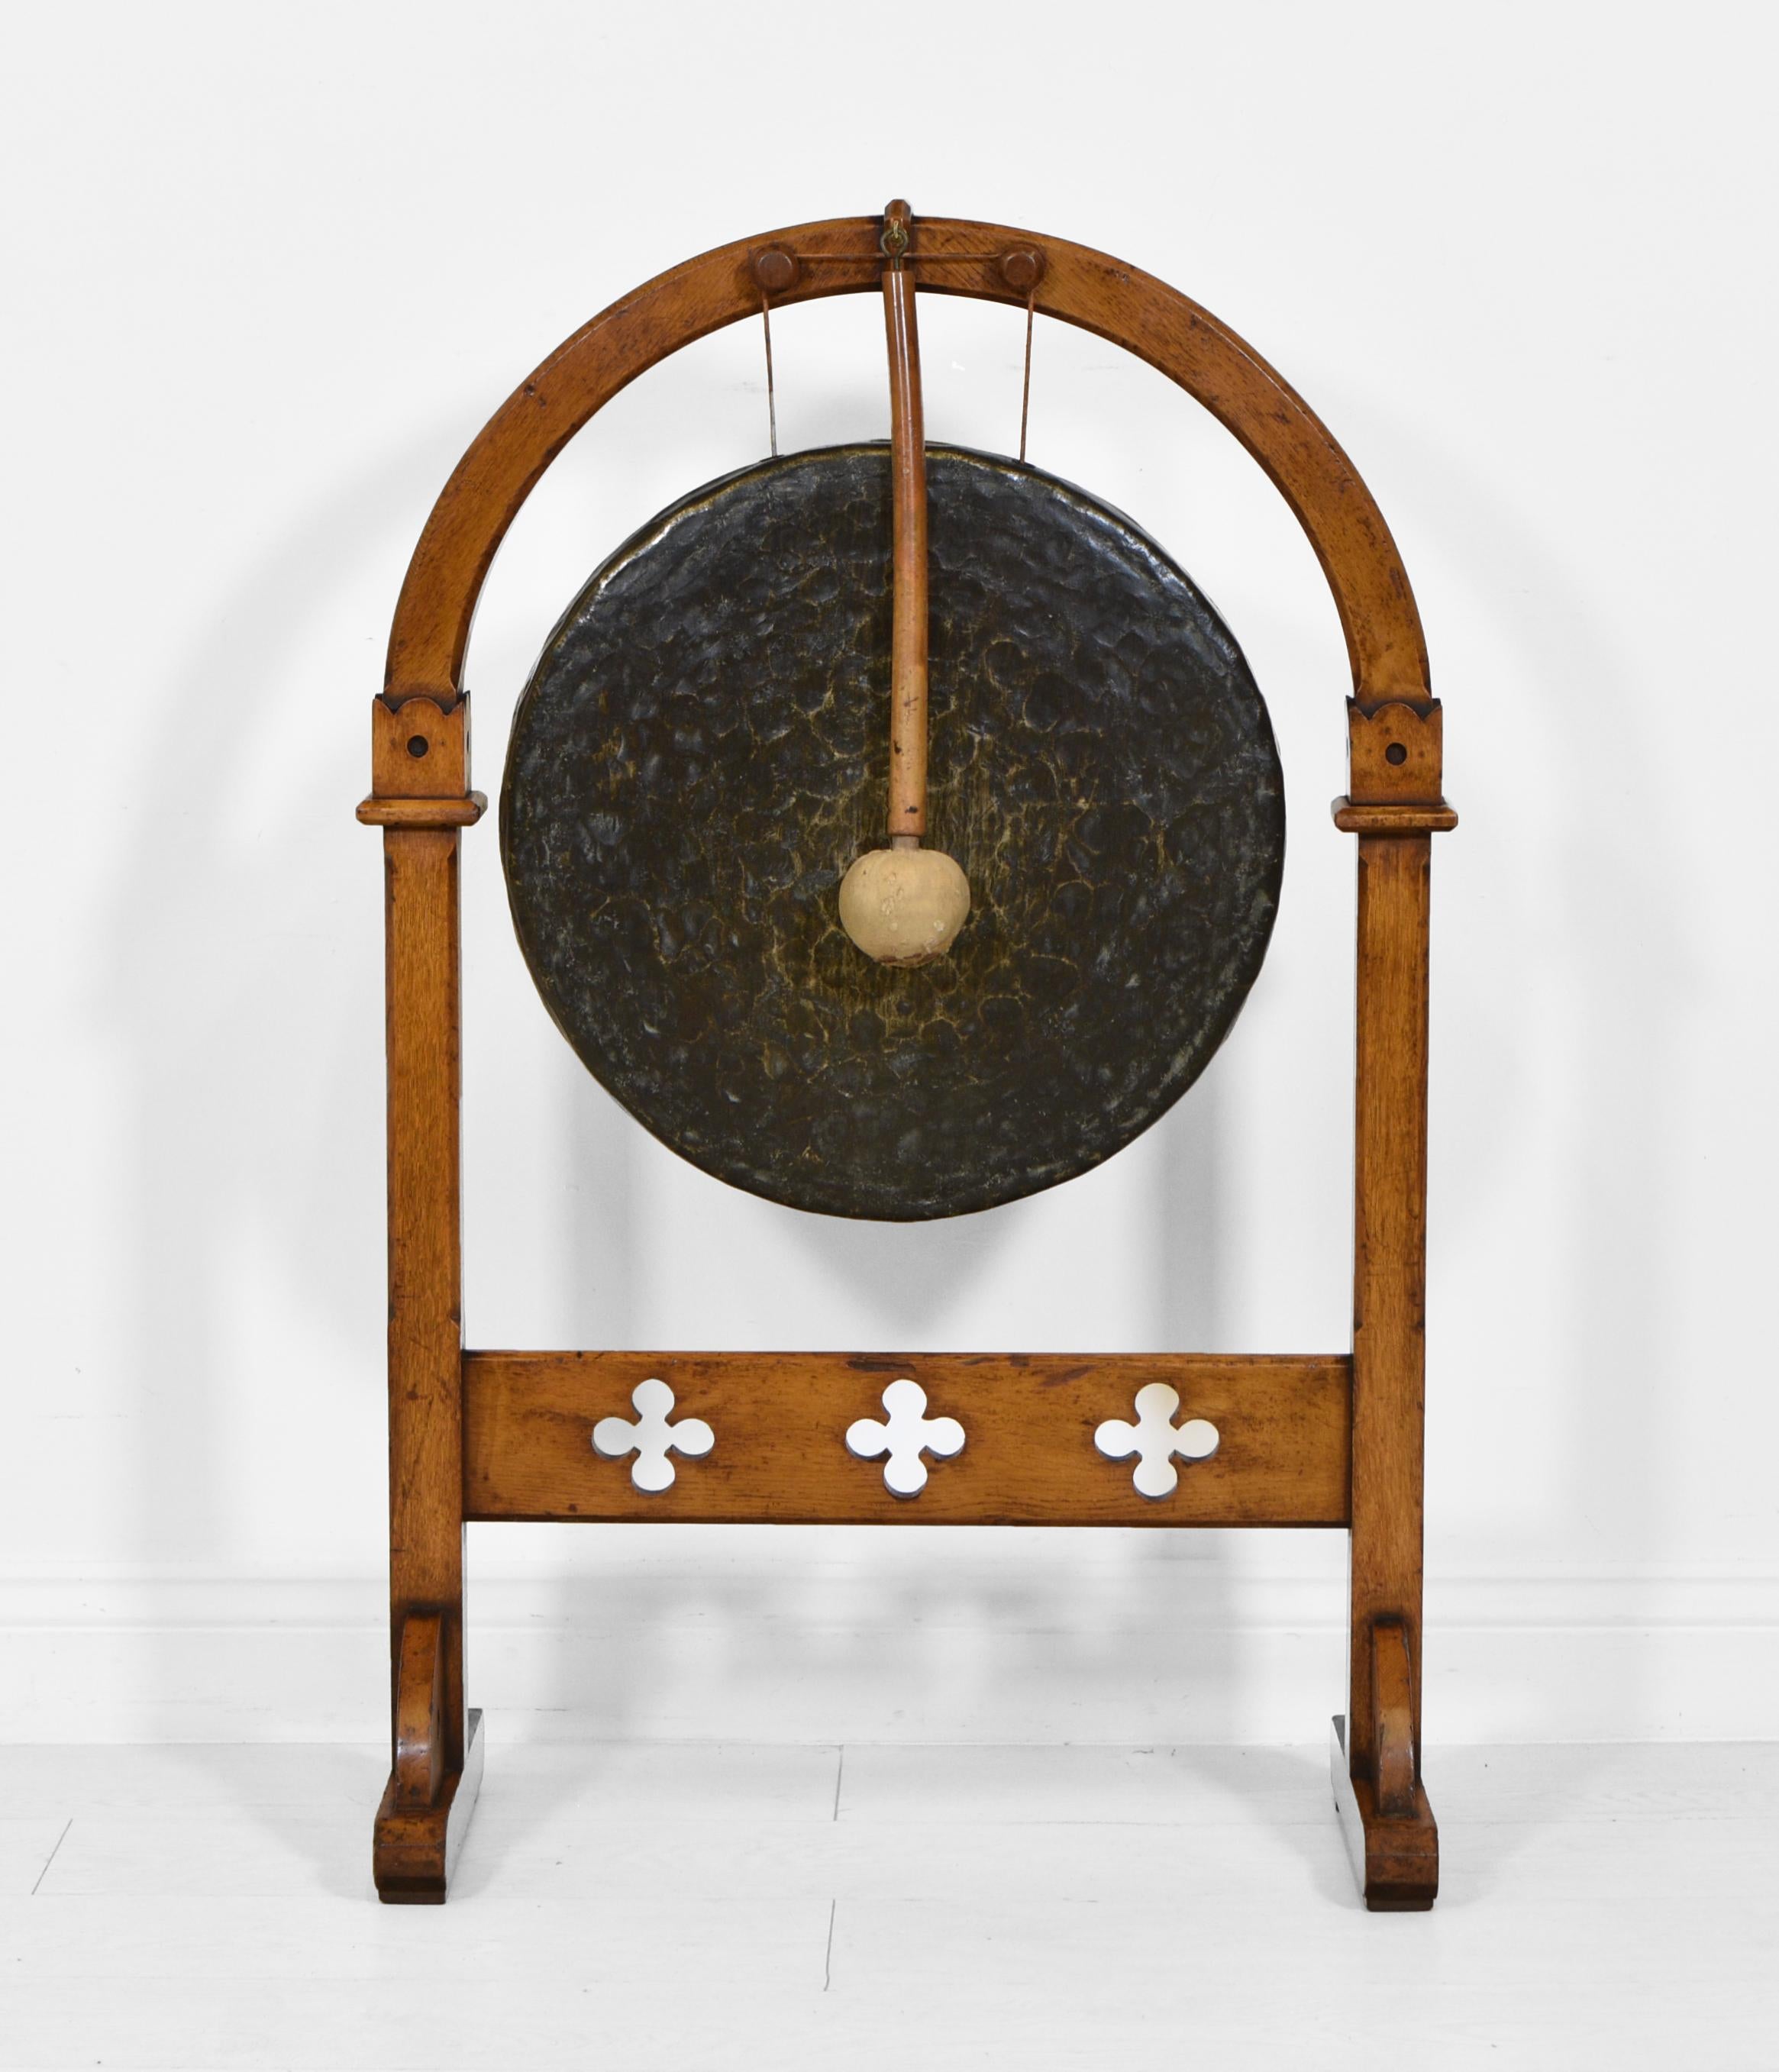 A Victorian period Gothic revival golden oak and brass dinner gong with beater. Circa 1880.

The oak frame has an arched top and chamfered uprights. The cross stretcher has quatrefoil pierced decoration. The oak frame does has scuff marks and